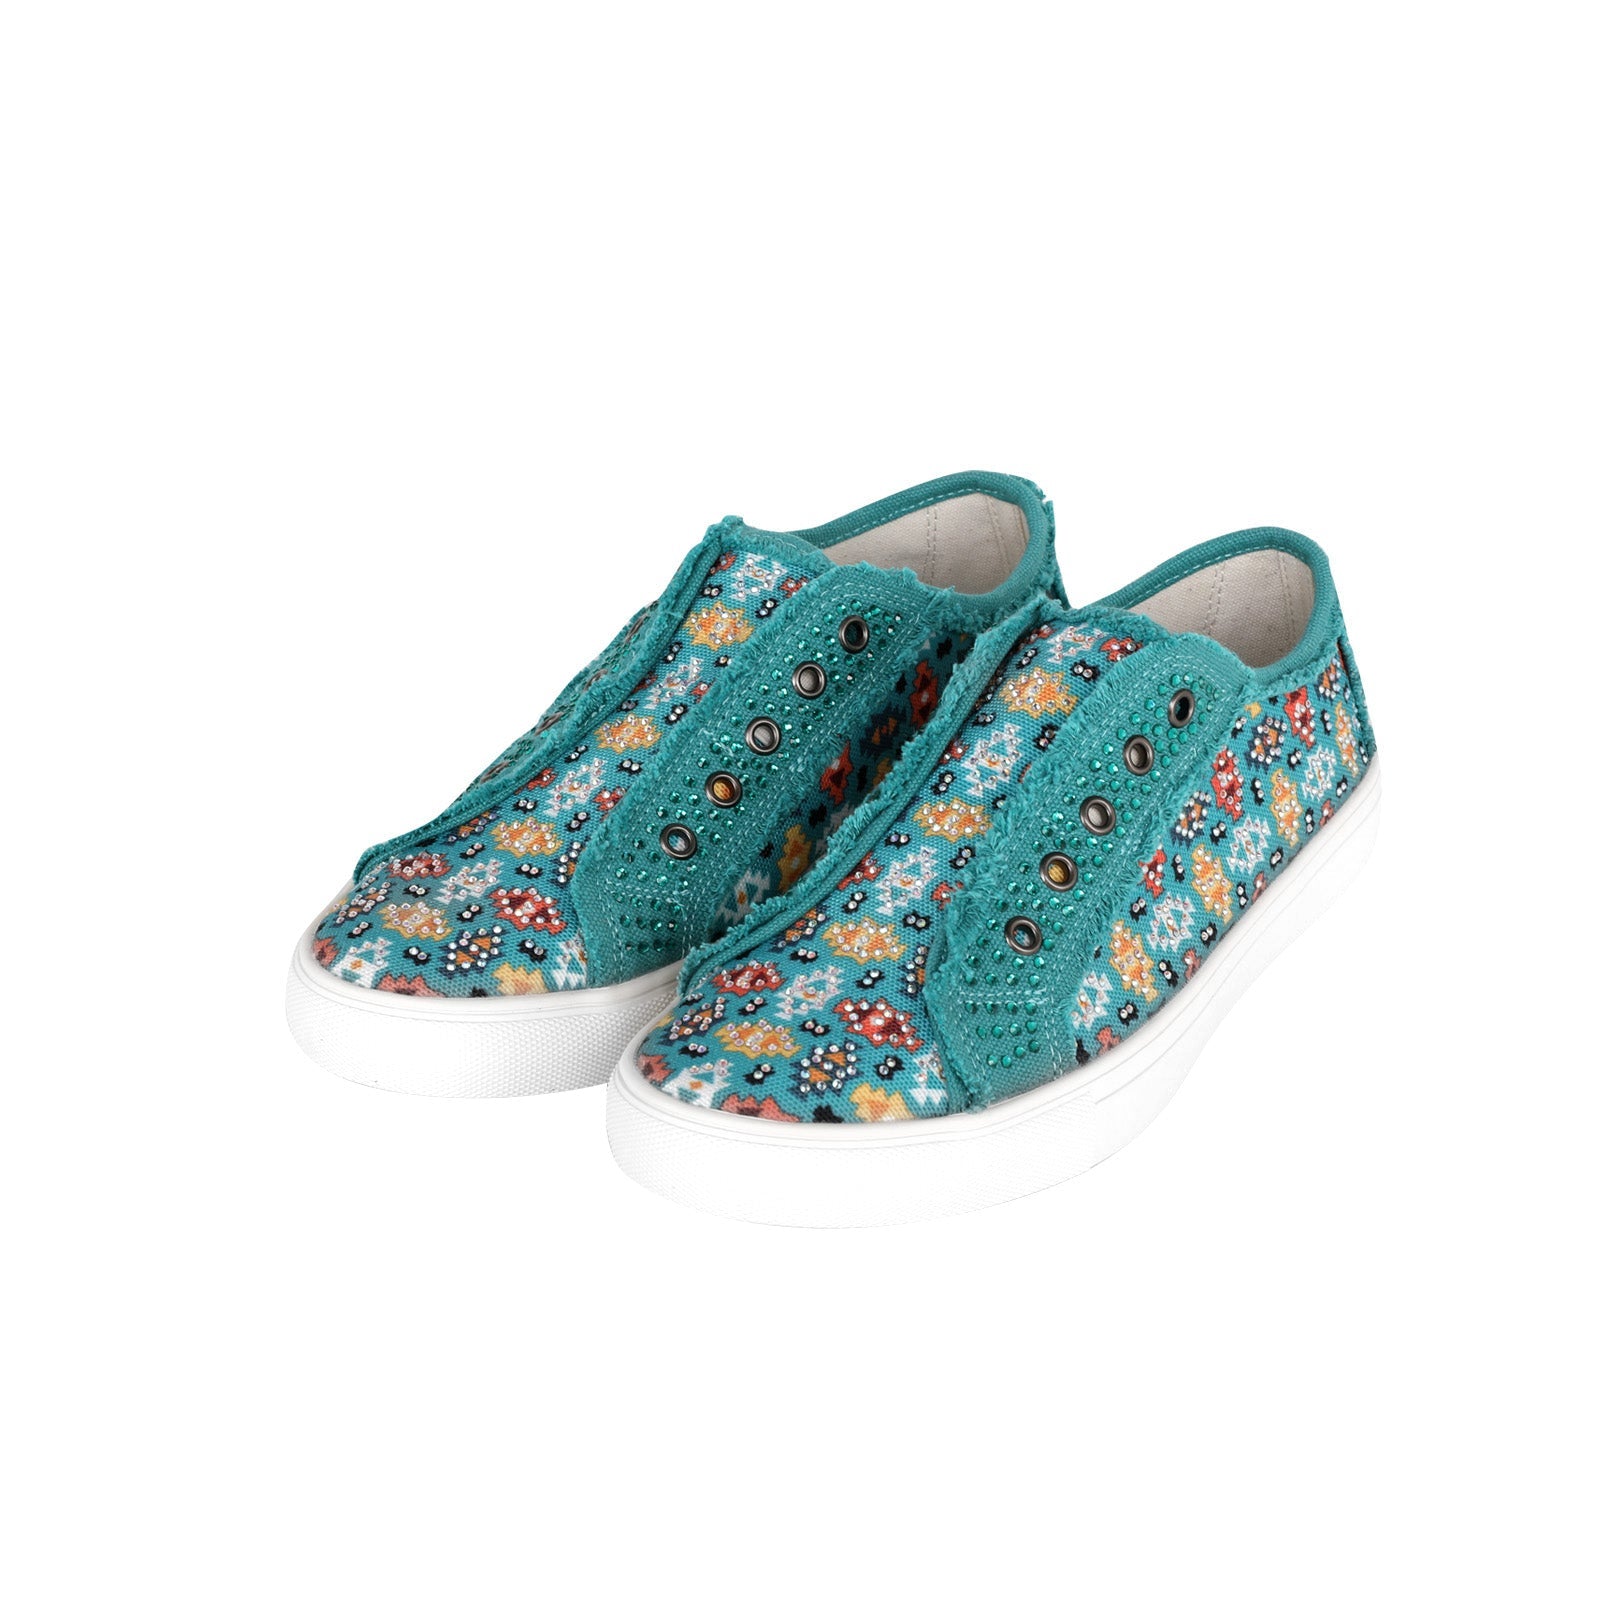 Montana West Aztec Print Bling Canvas Shoes - Cowgirl Wear